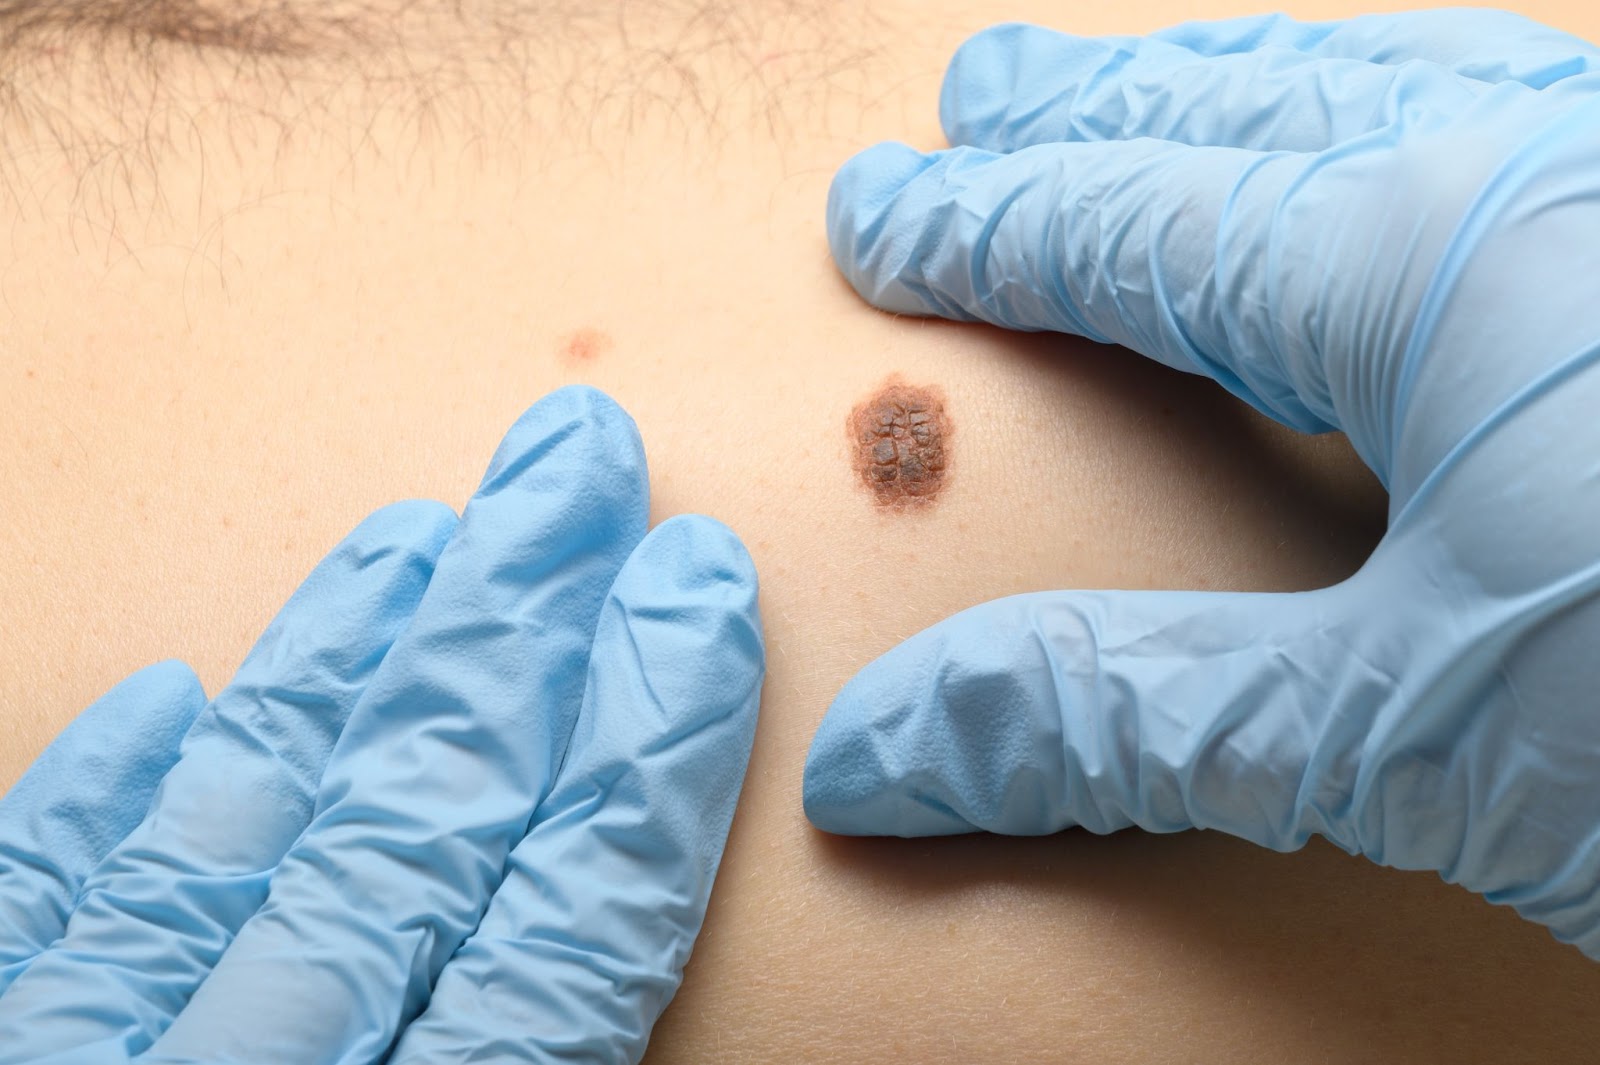 Close up of a doctor examining a mole on a patient